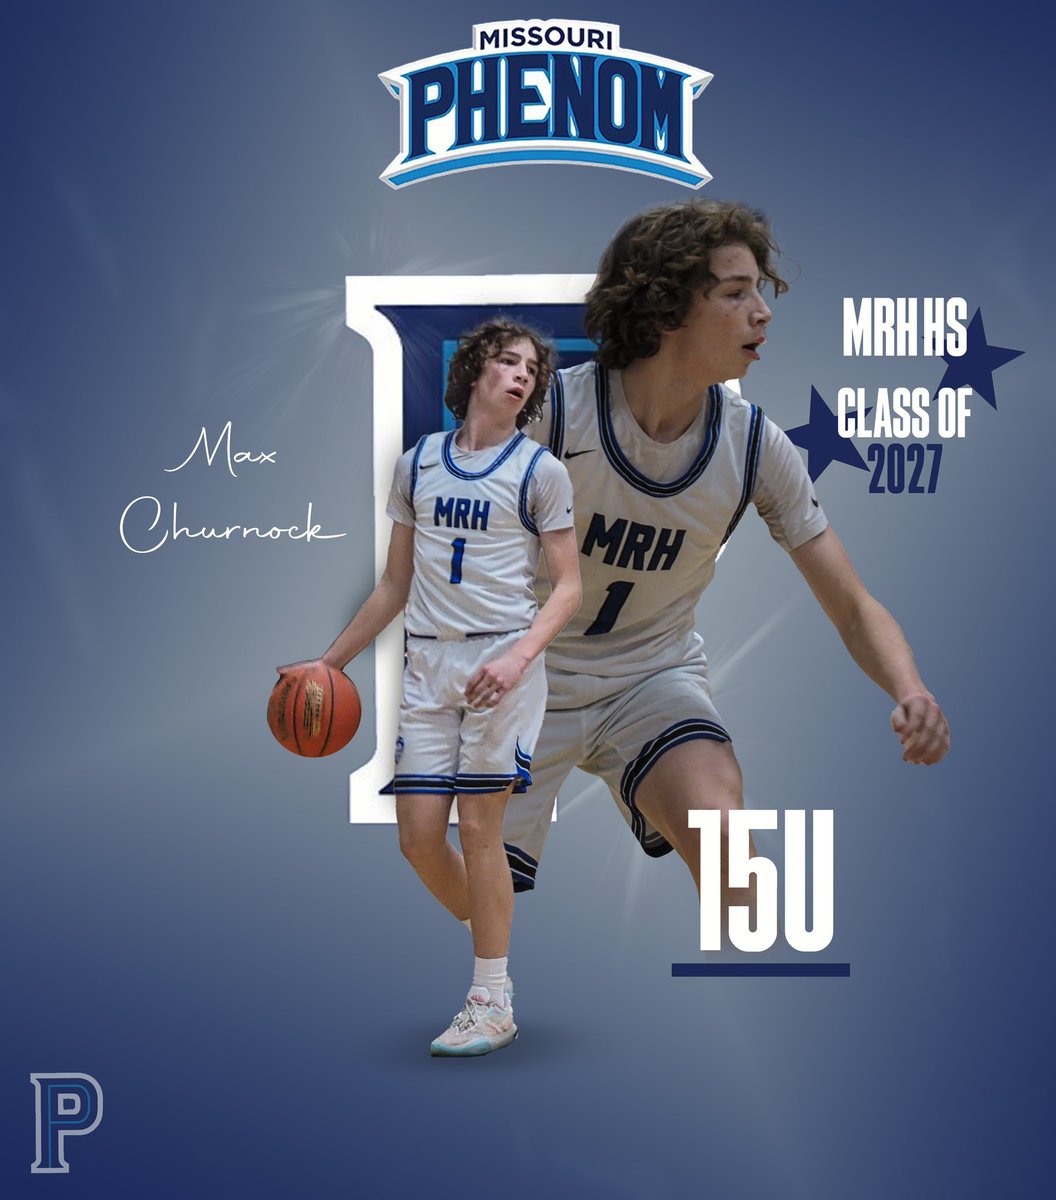 Our guys Liam Missey & Max Churnock (2027) are running with @MOPhenom_MBB this season starting tonight. Great opportunity for two hard working, talented players. #mrhfamily